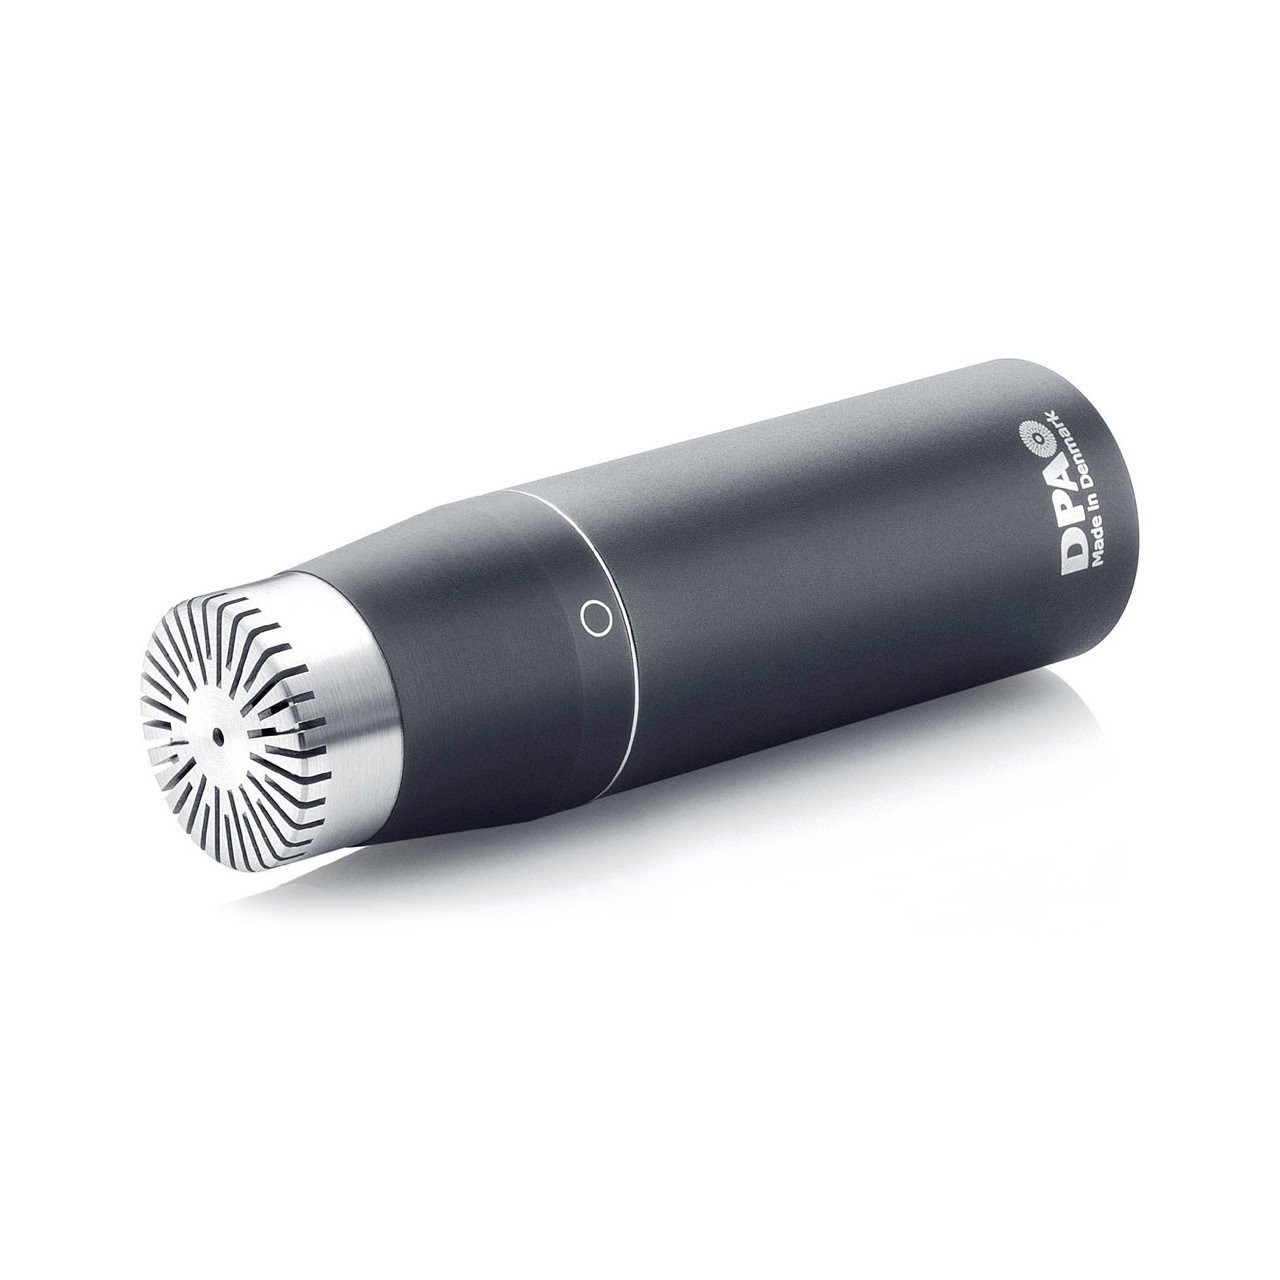 Condenser Microphones - DPA D:dicate 4006C Omnidirectional Microphone, Compact